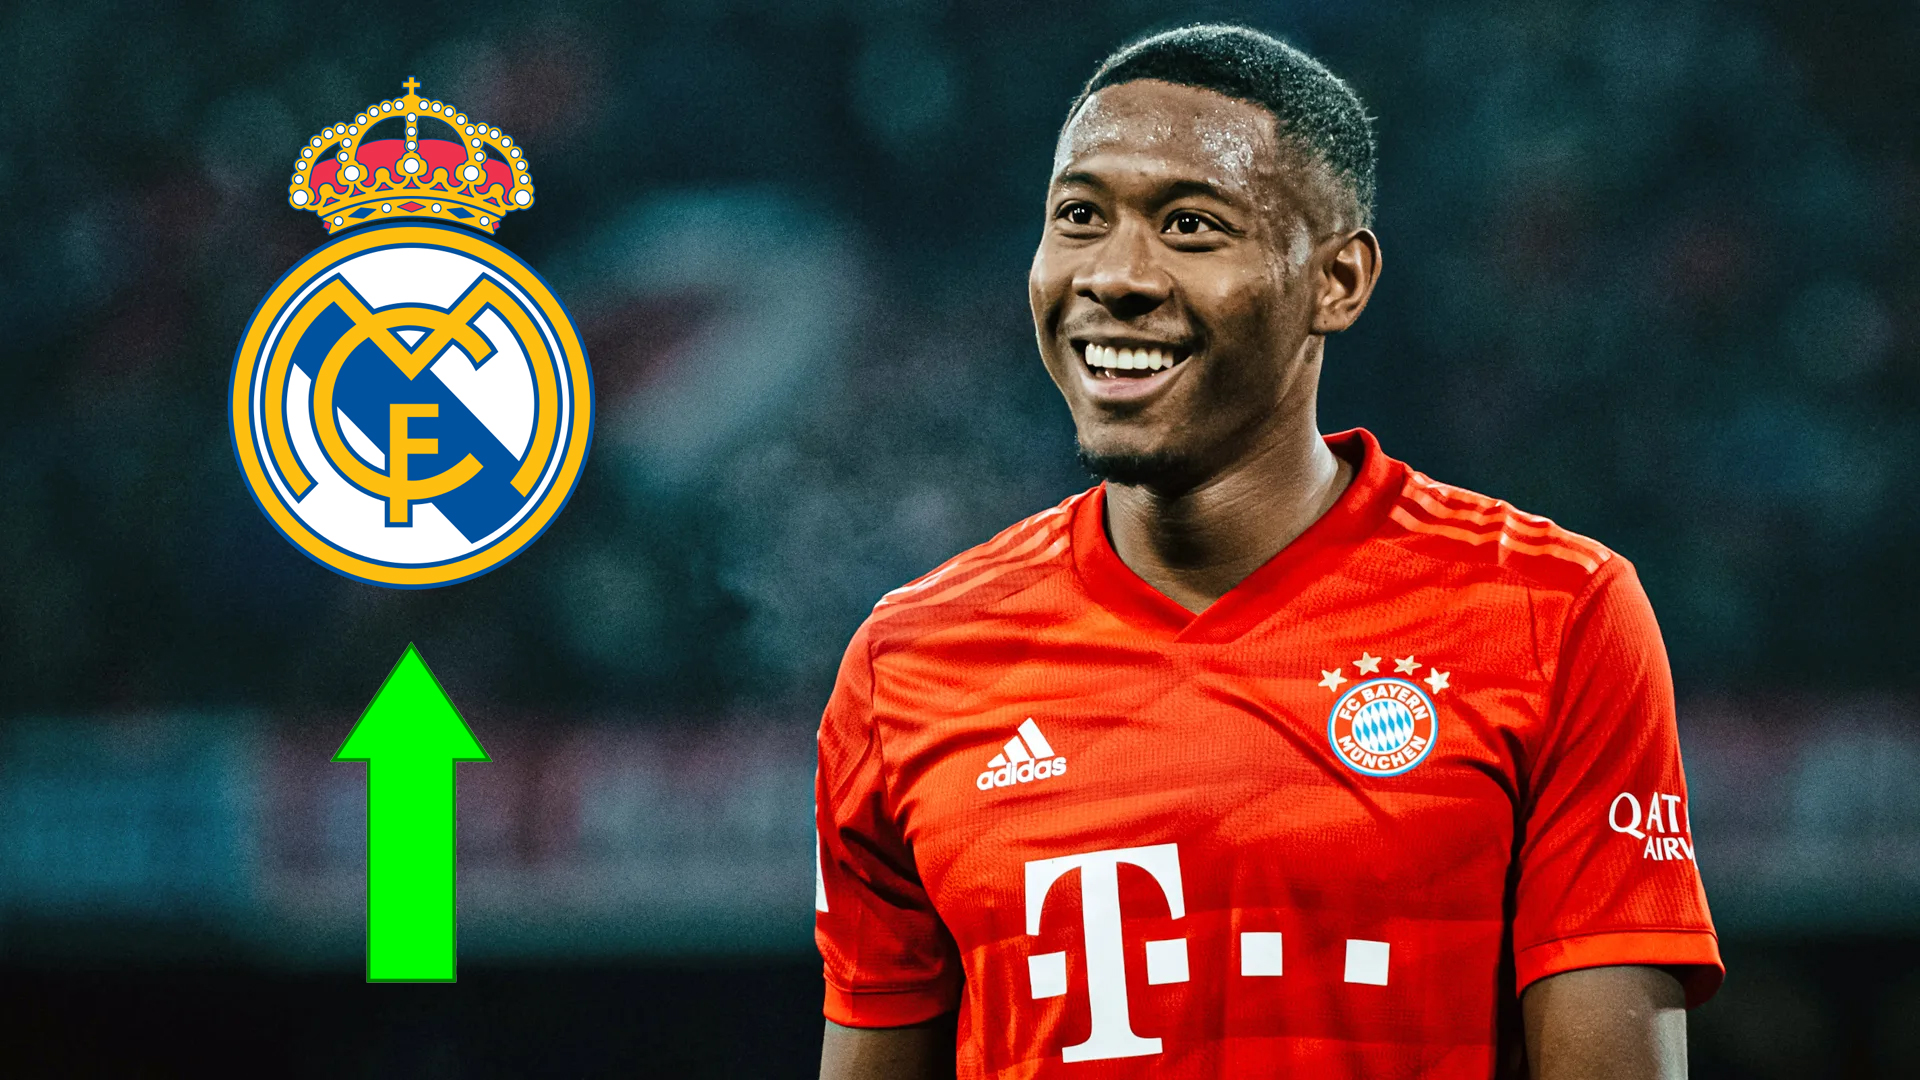 Alaba reaches agreement to join Real Madrid on five-year deal